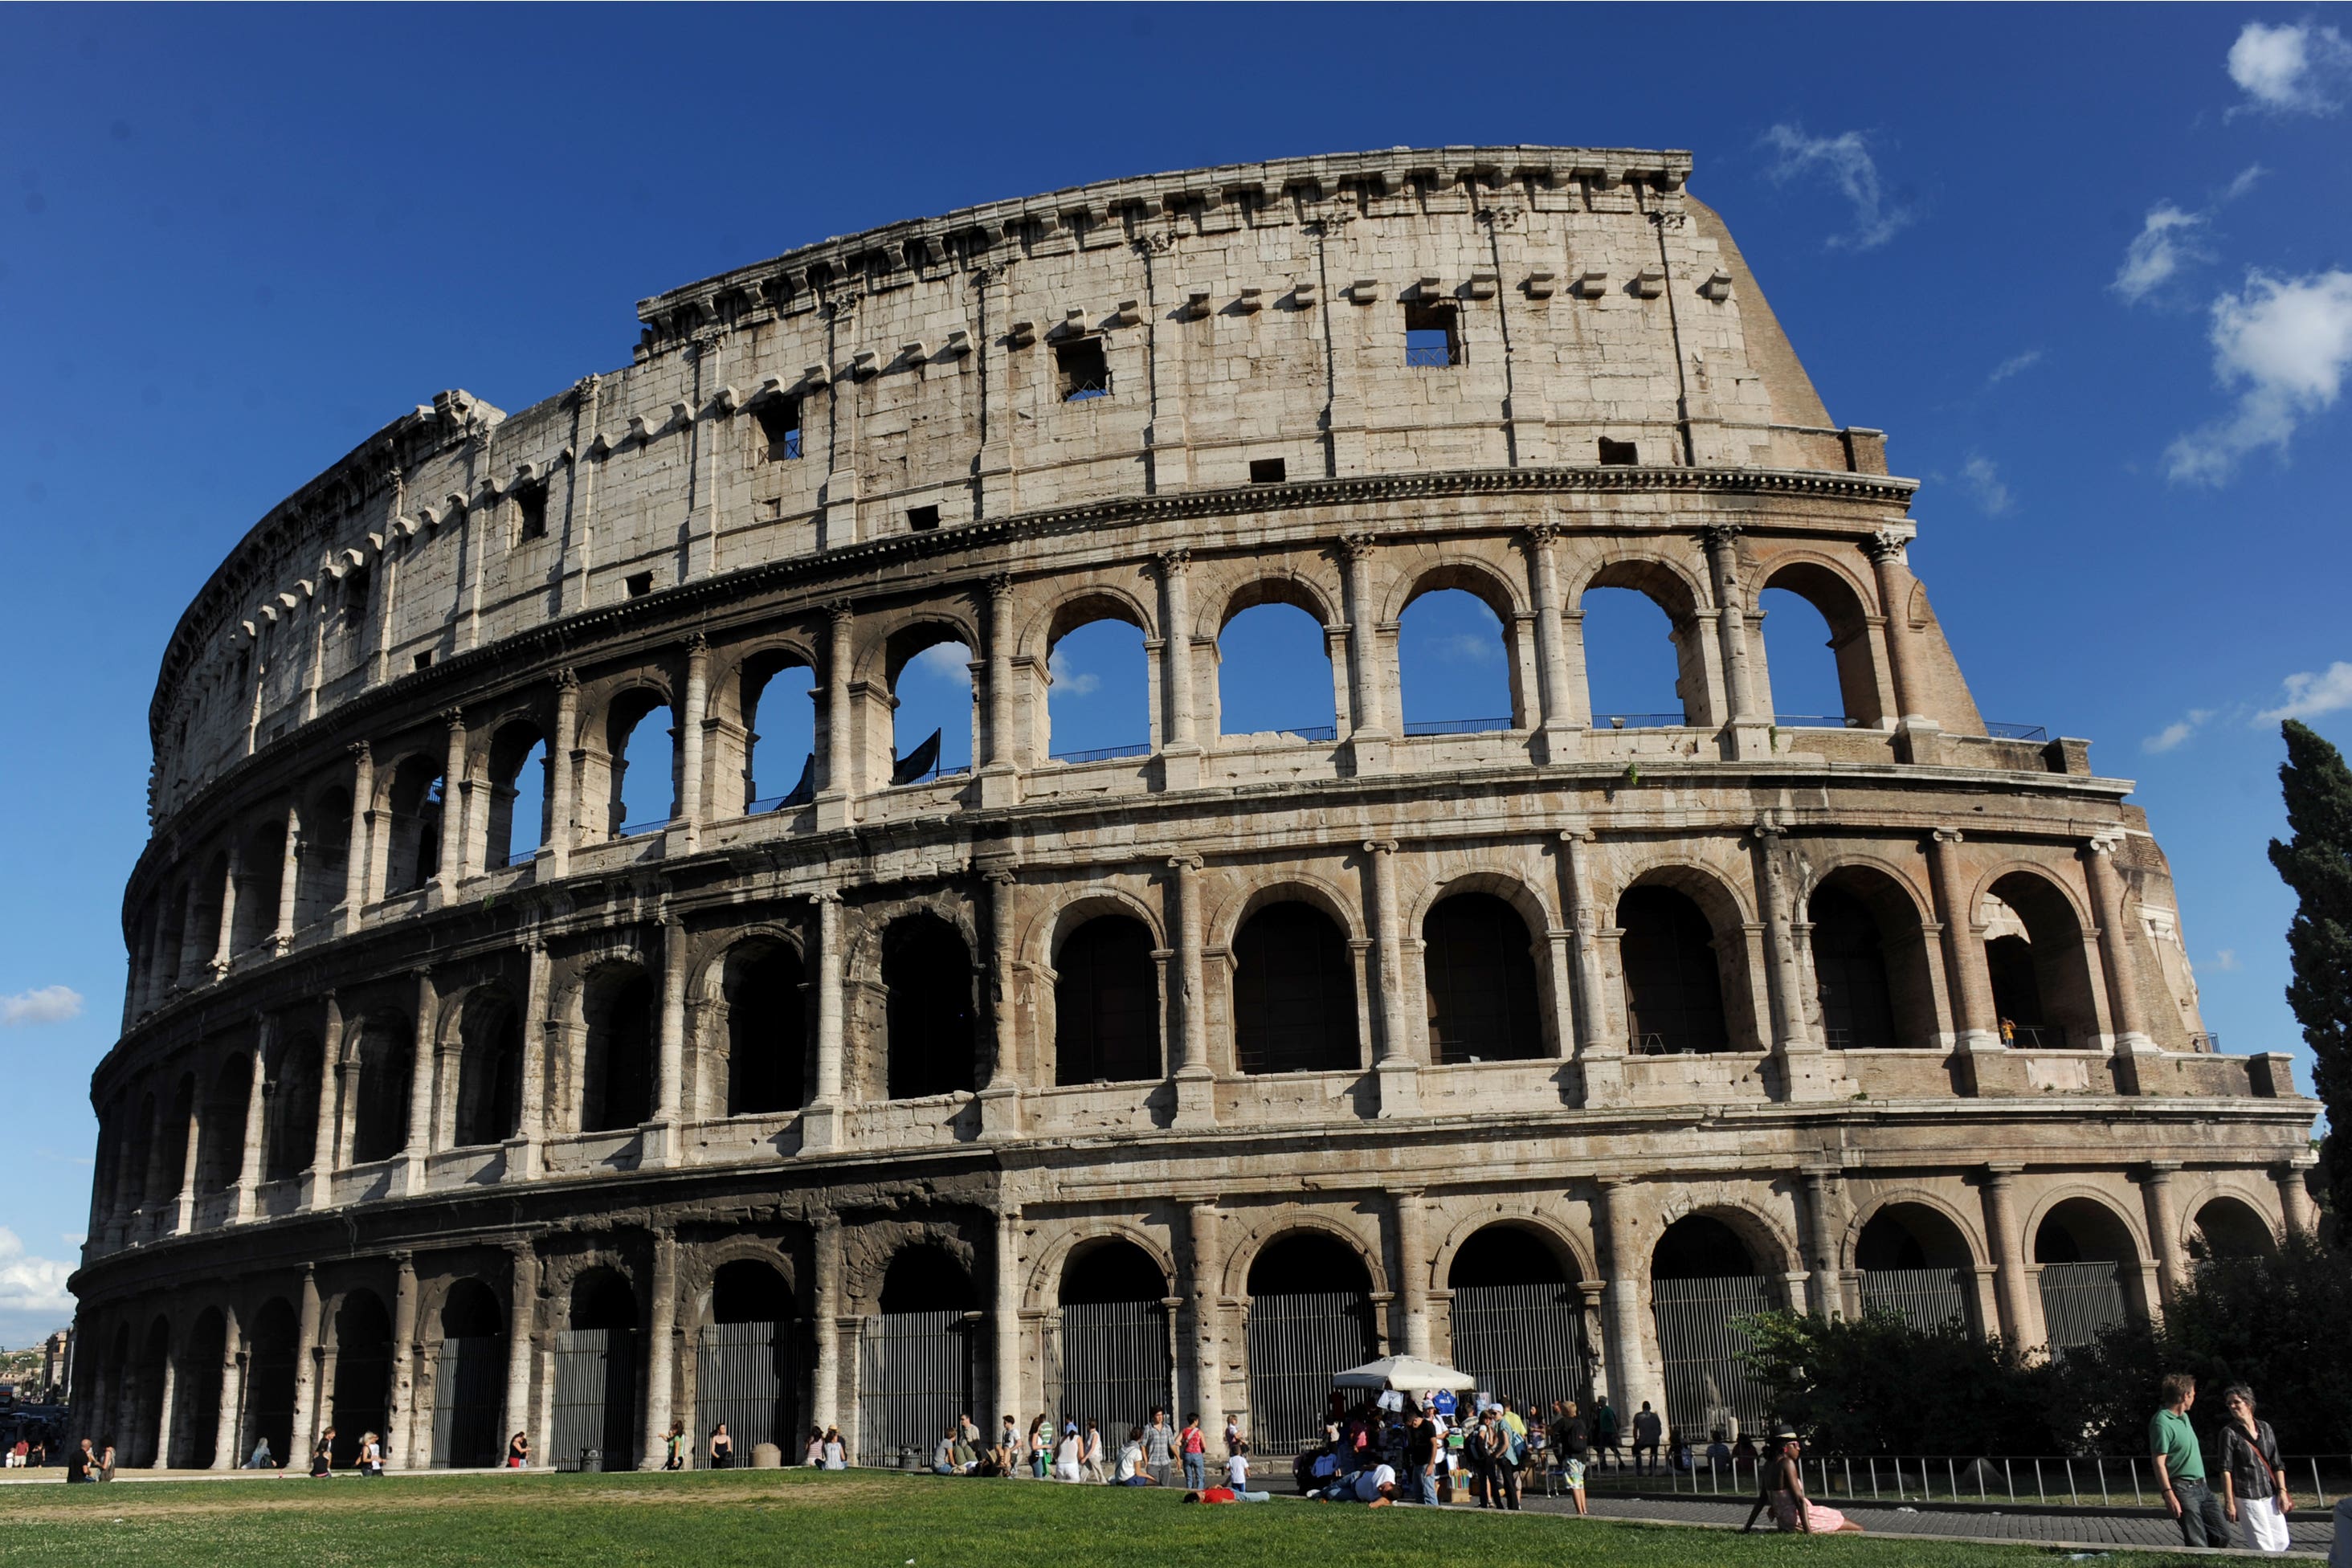 Rome’s Colosseum takes second place in the top global attractions category (Anthony Devlin/PA)